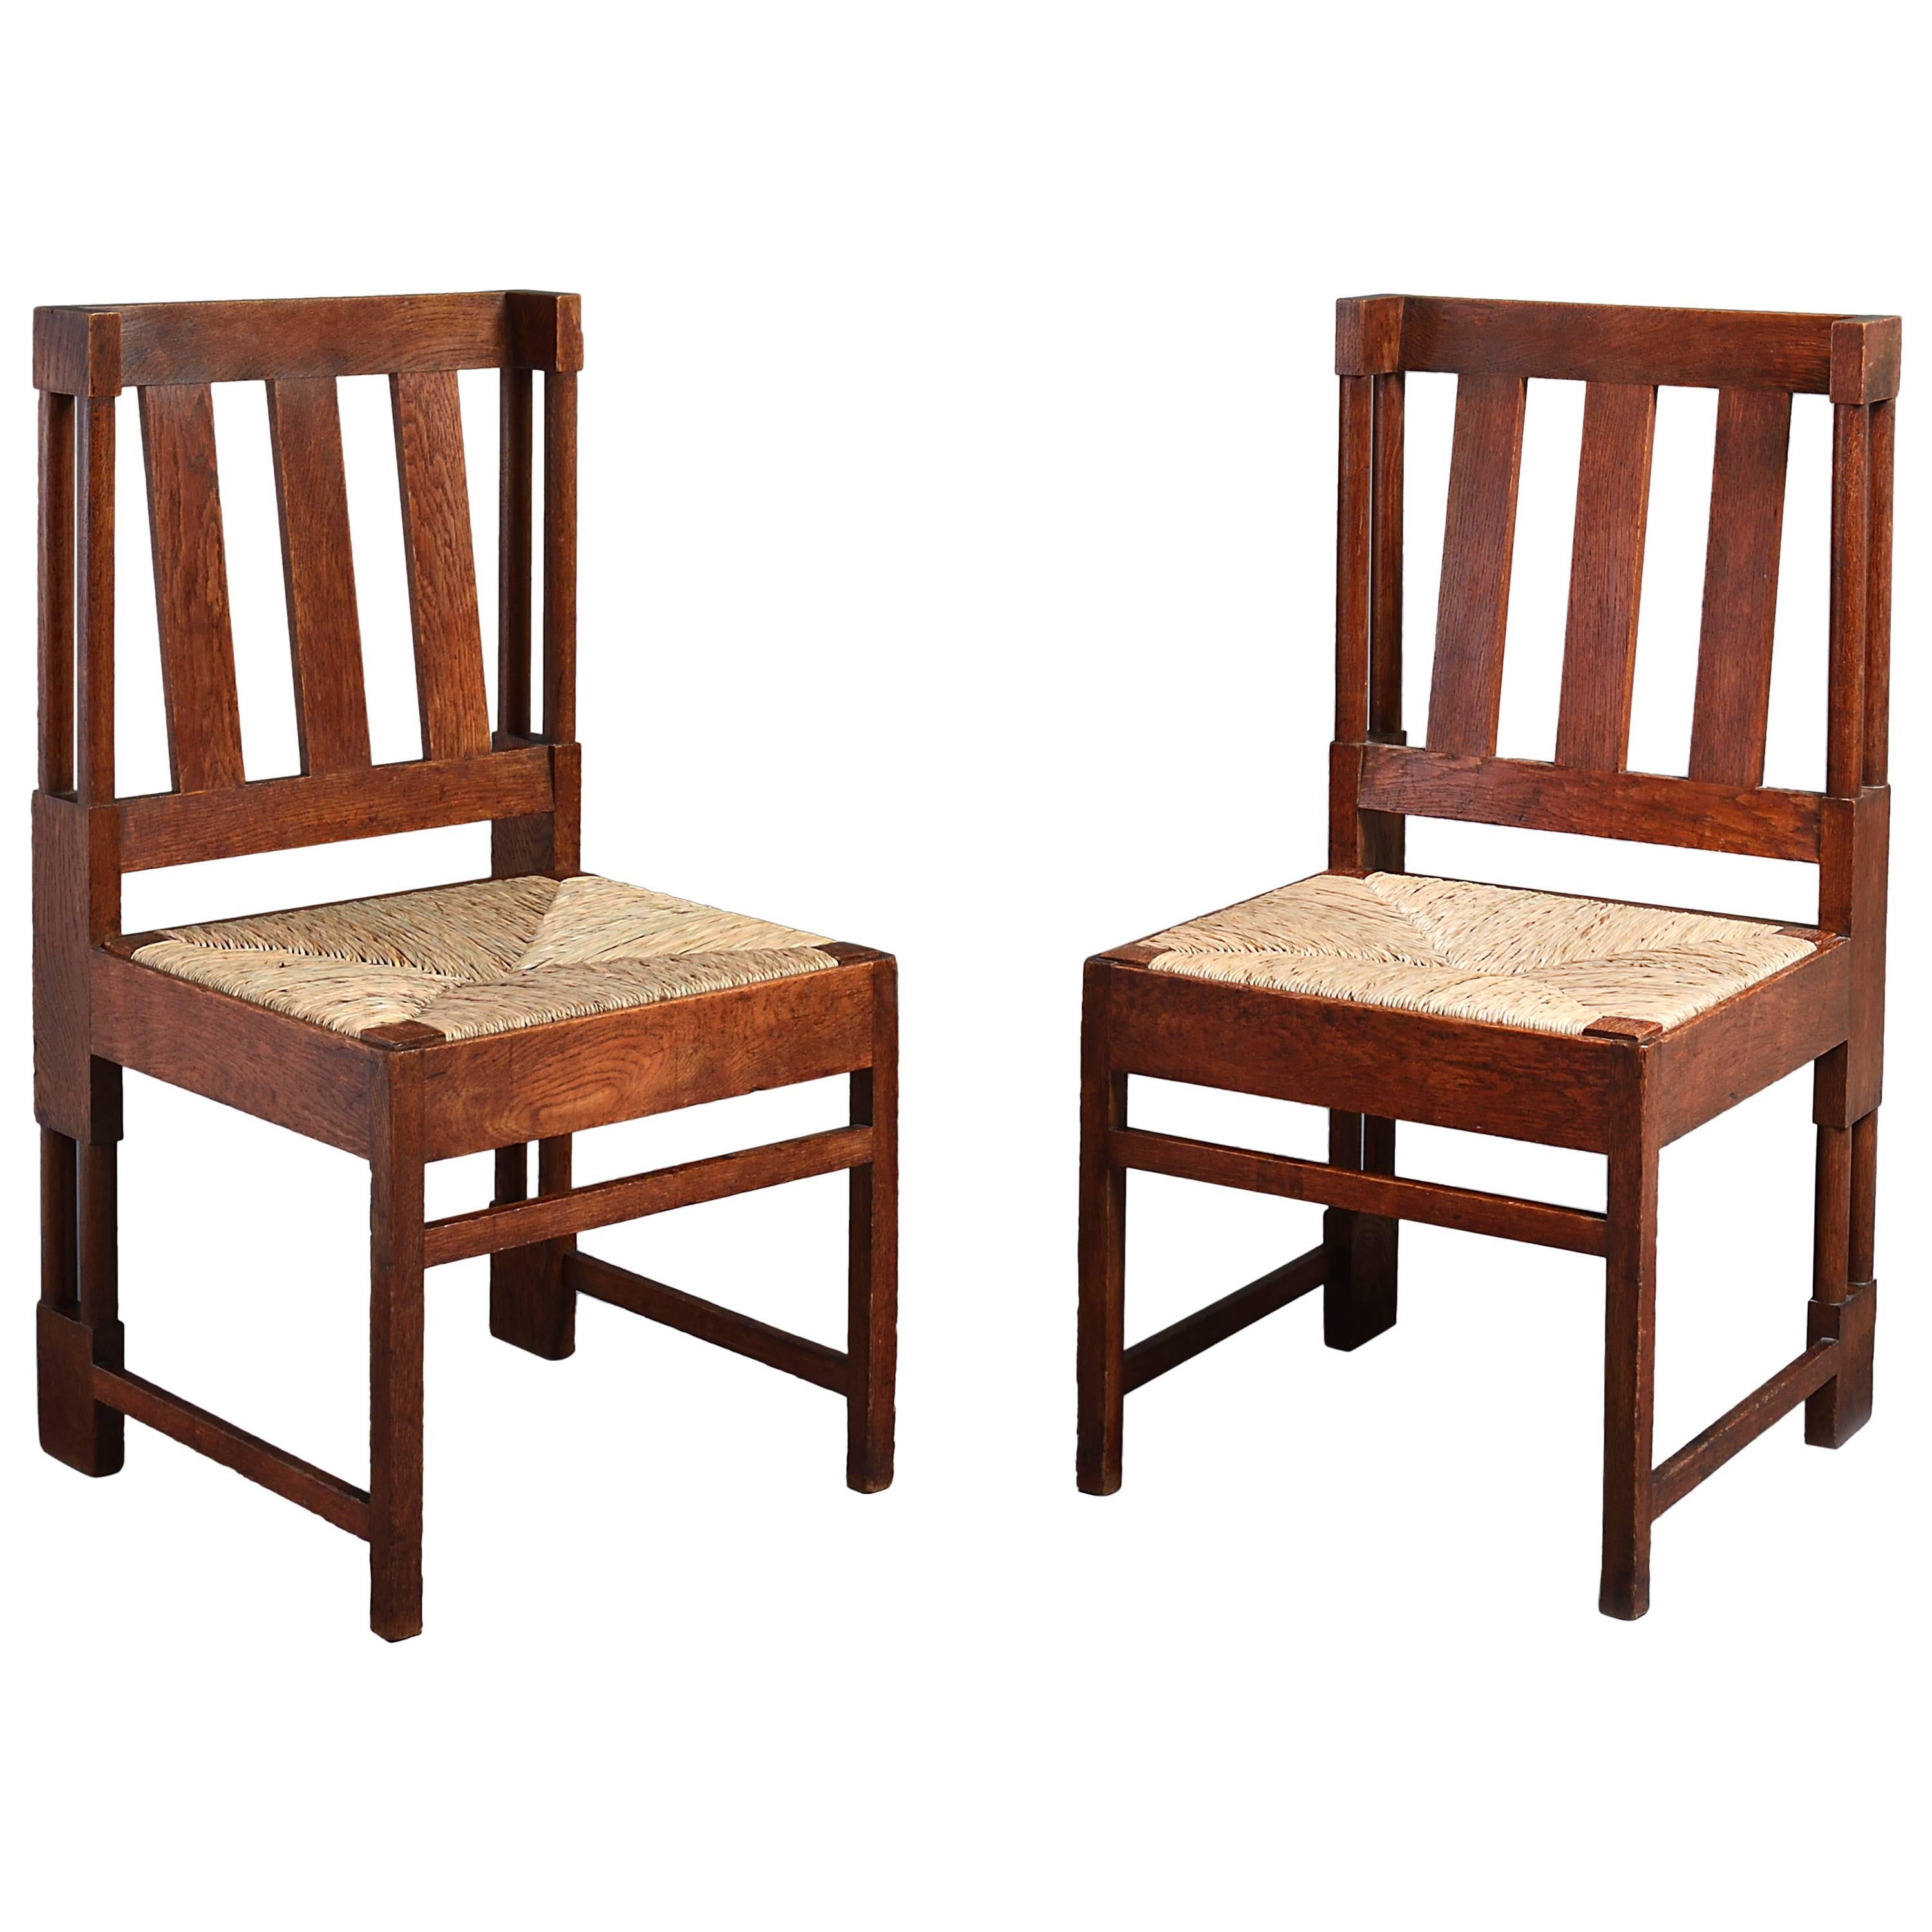 Pair of Arts & Crafts Oak Chairs